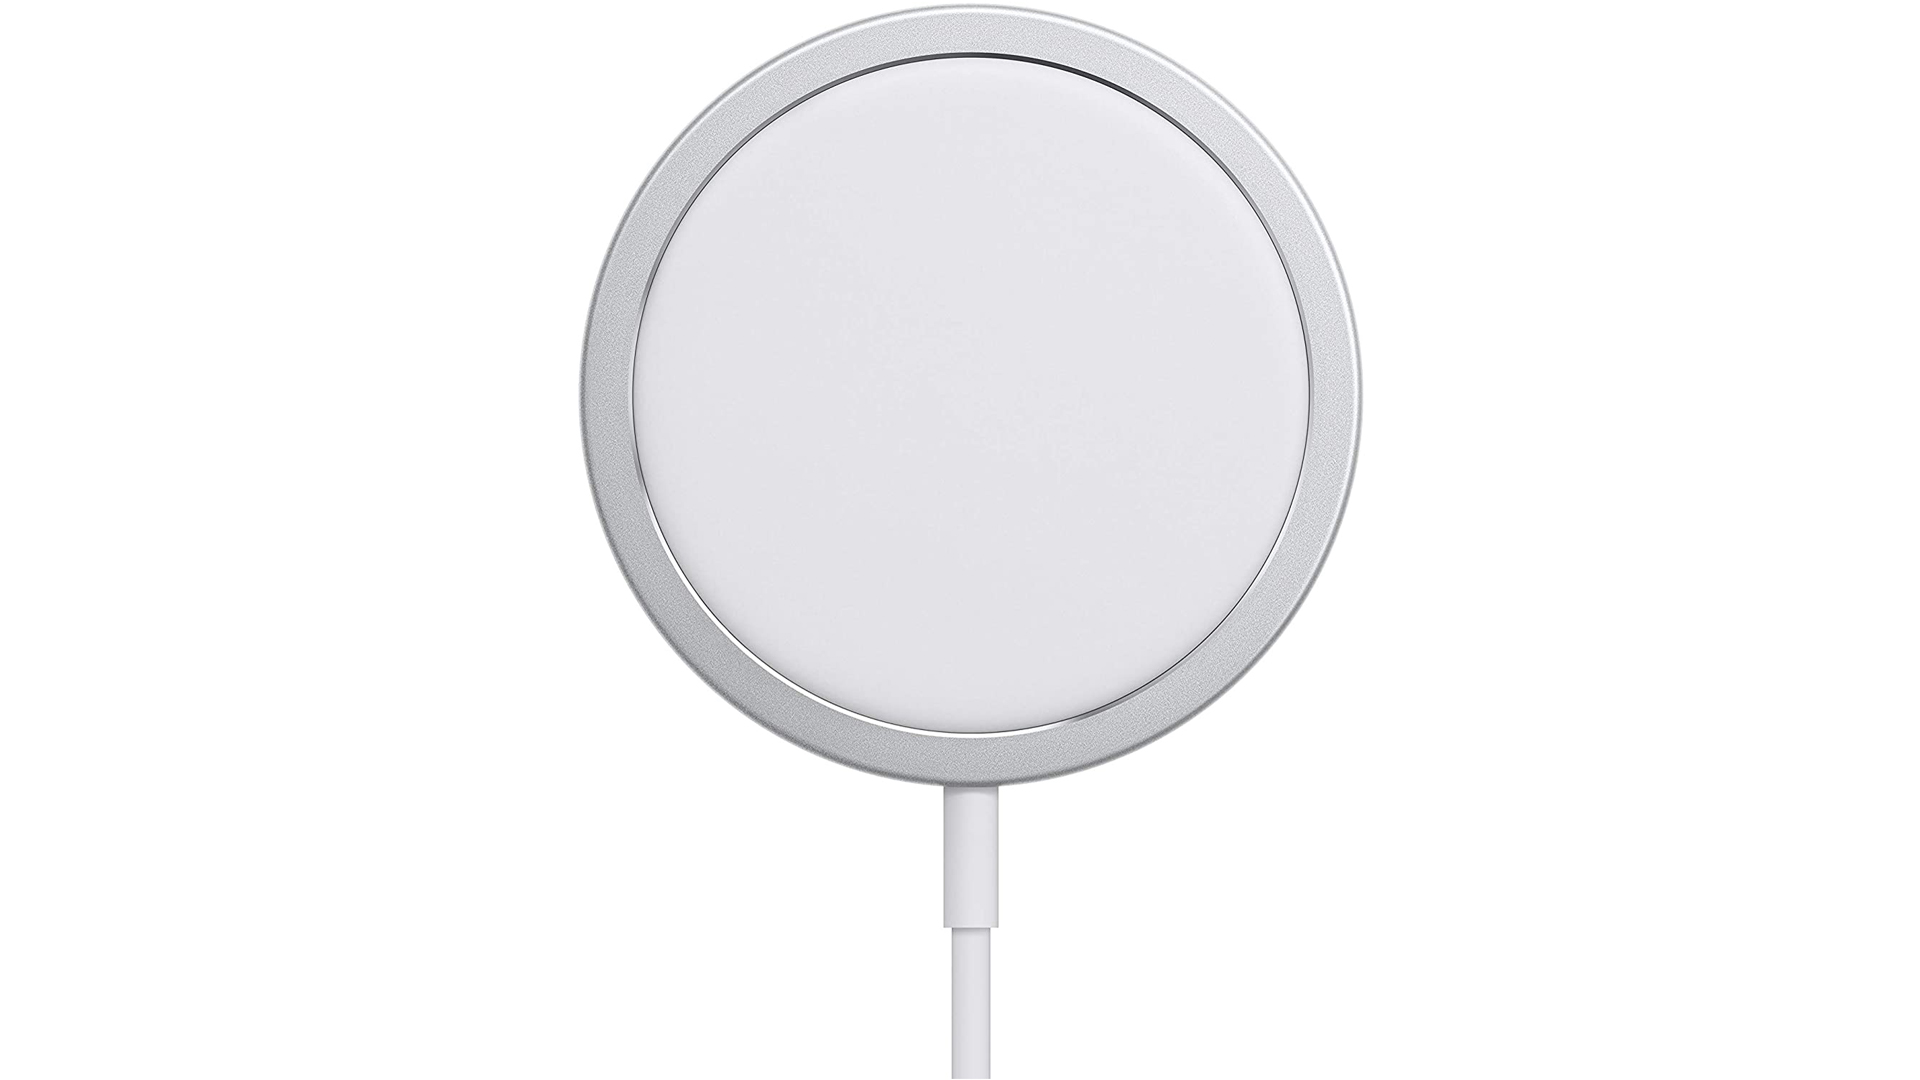 Apple's MagSafe charging pad shown on a field of white.